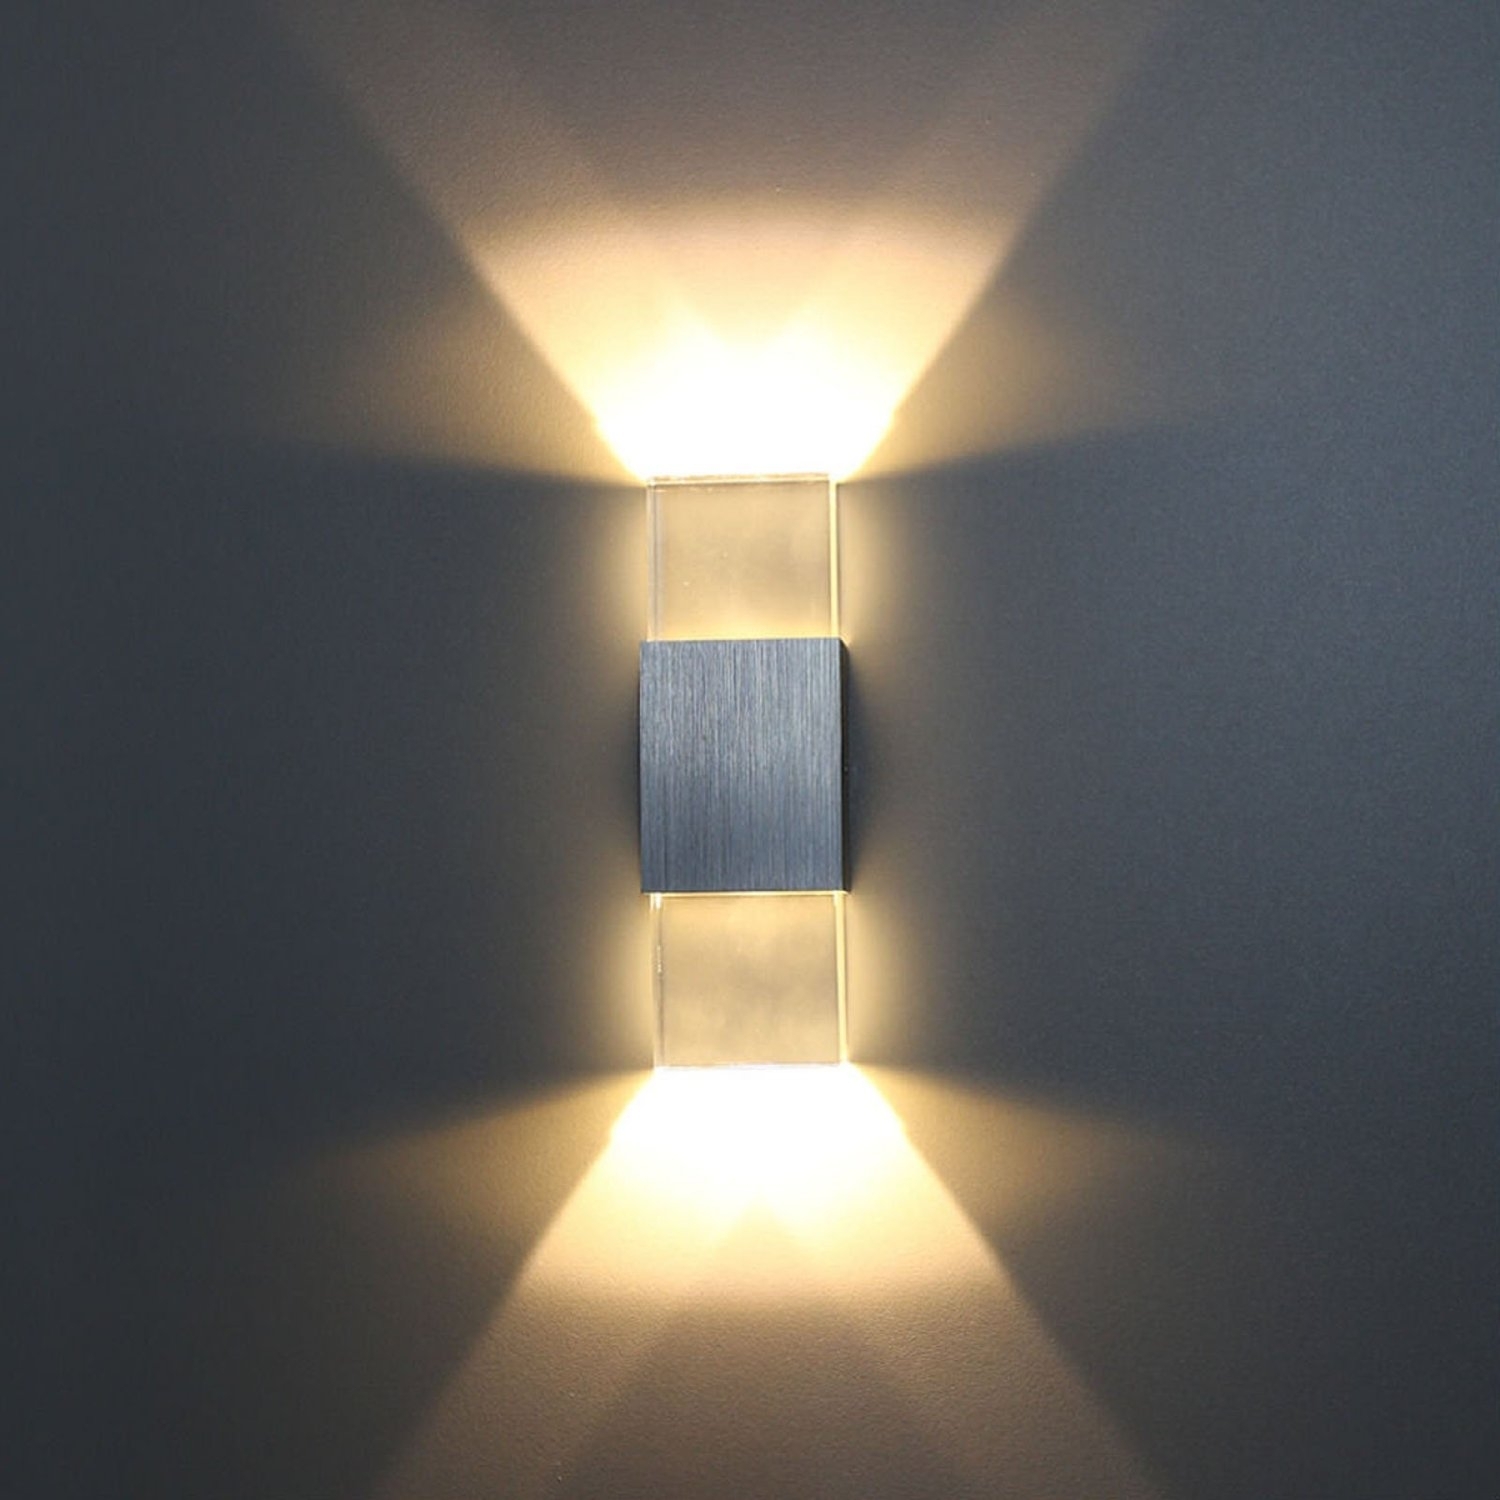 Wall Sconce Light Fixture Contemporary Wall Lighting Long Cylinder ...